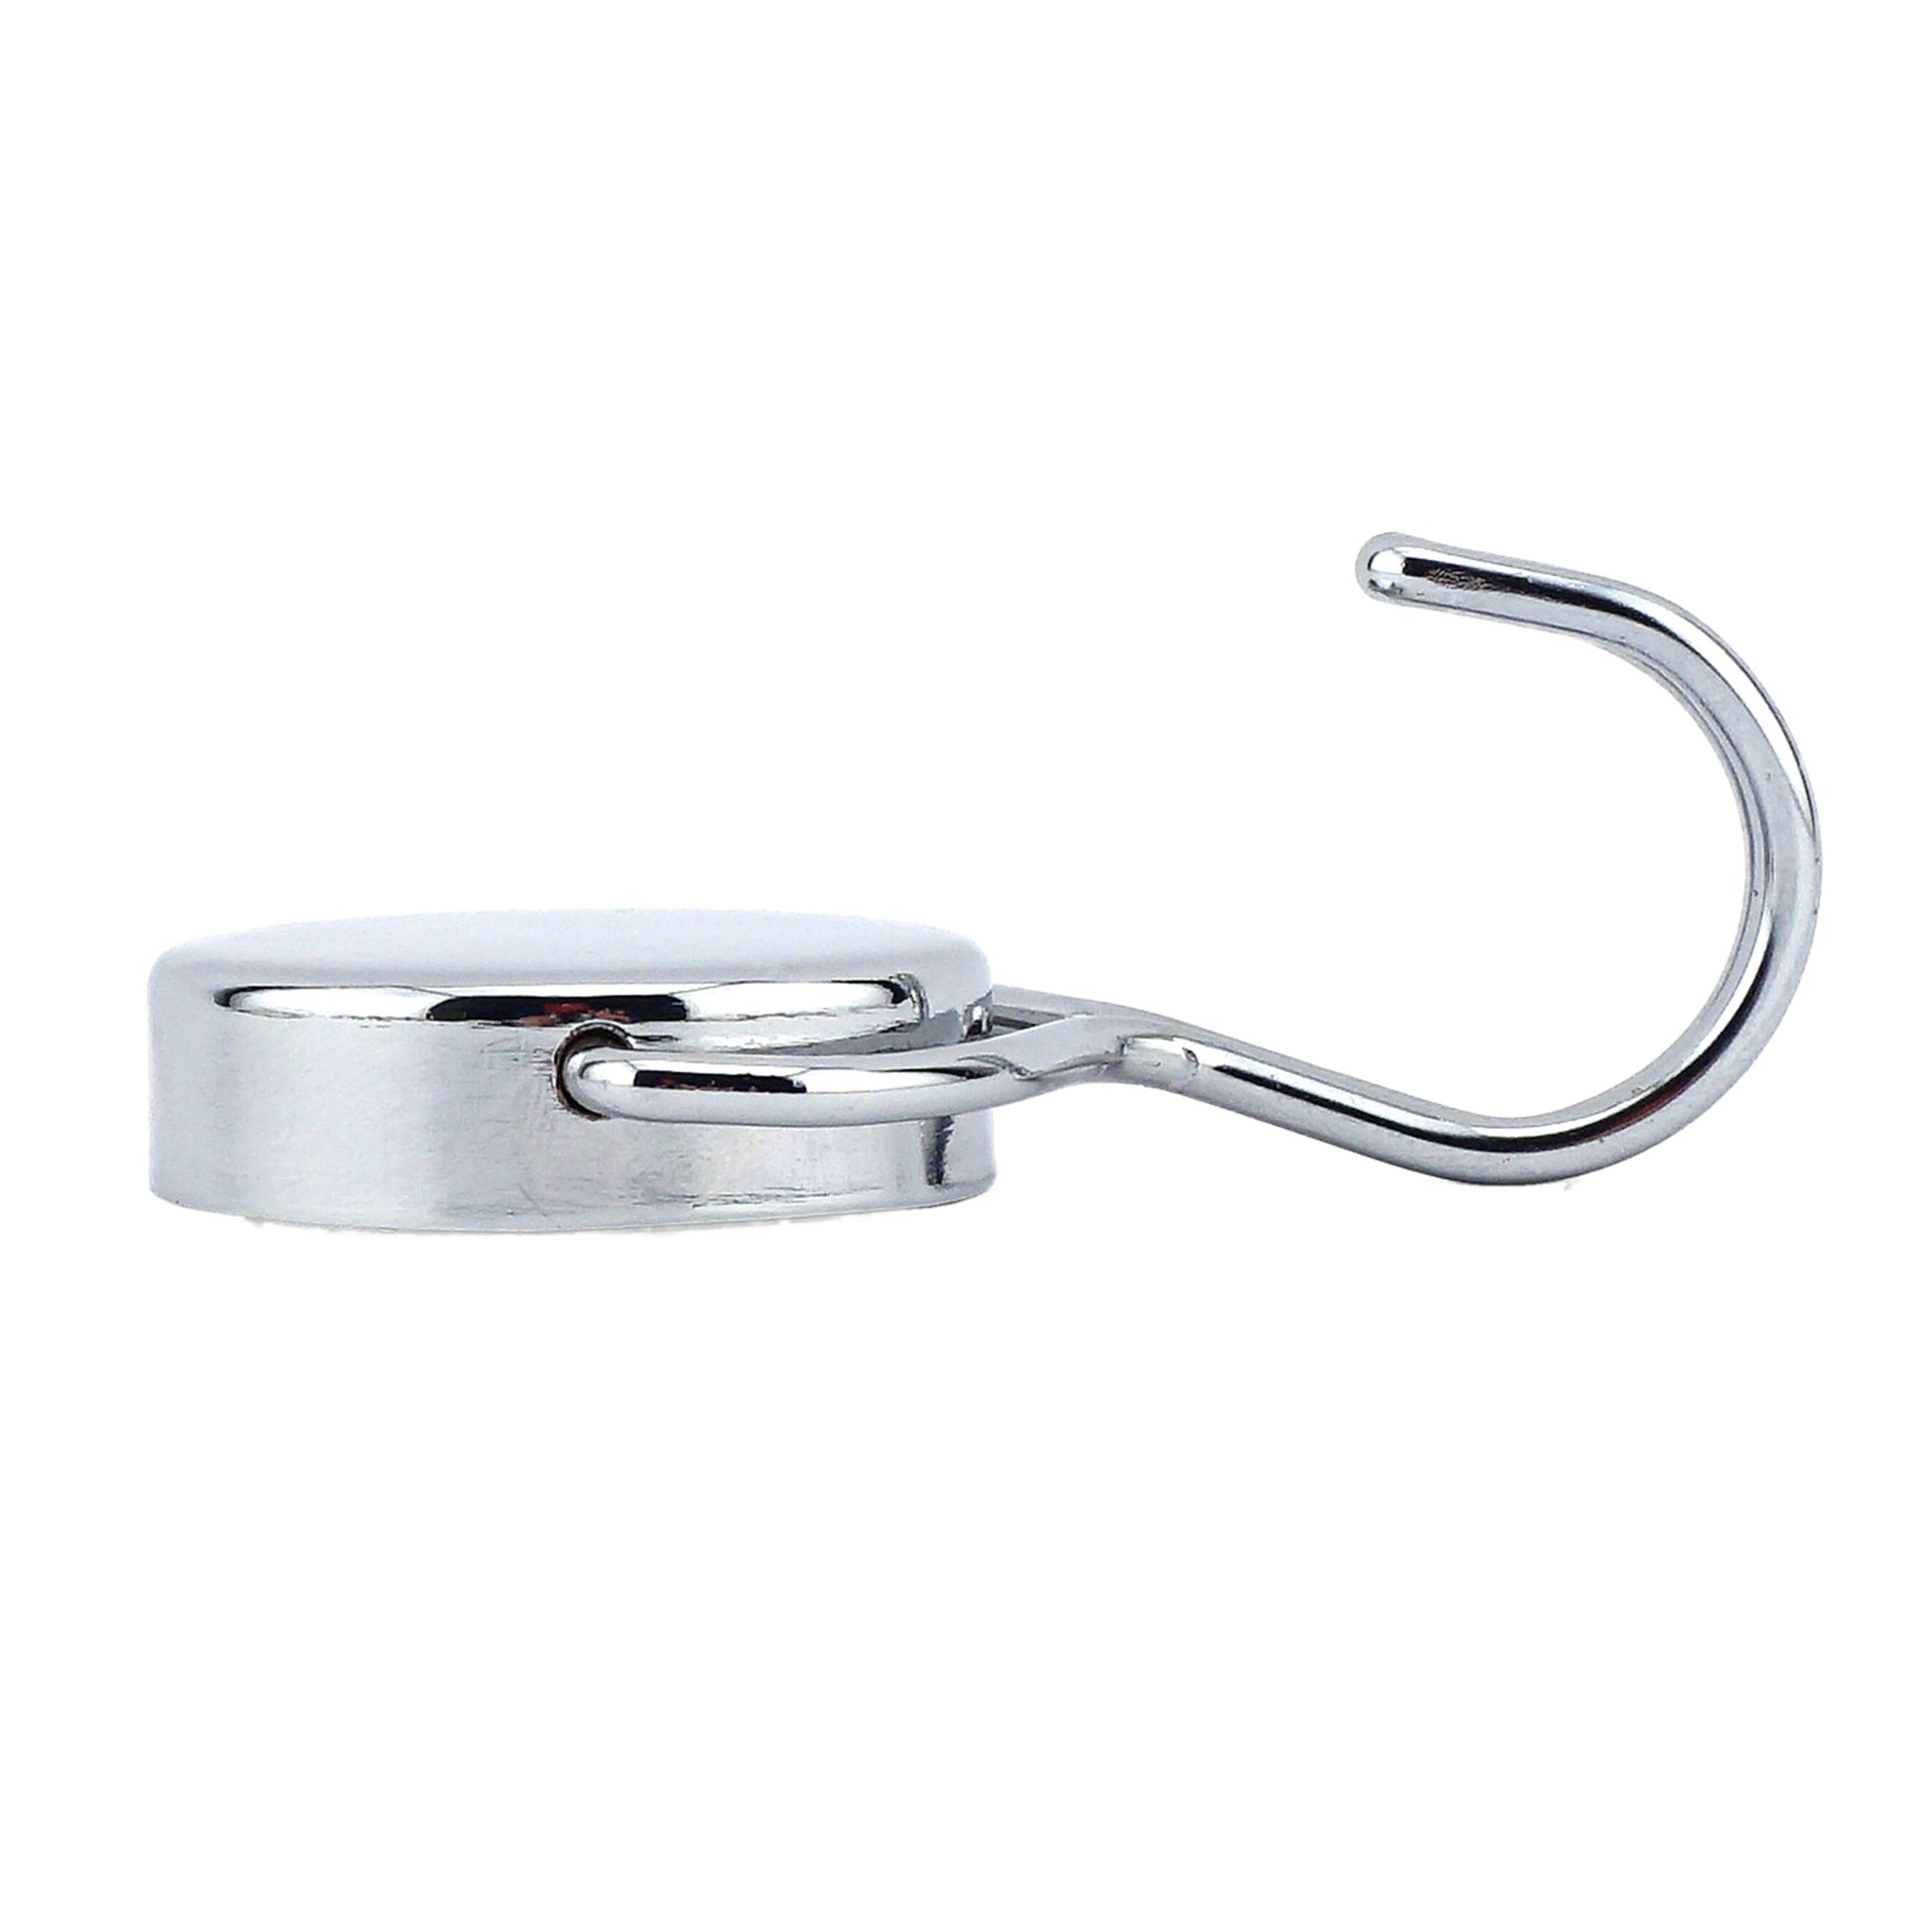 Load image into Gallery viewer, 07548 Super Blue™ Swinging Magnetic Hook - Bottom View